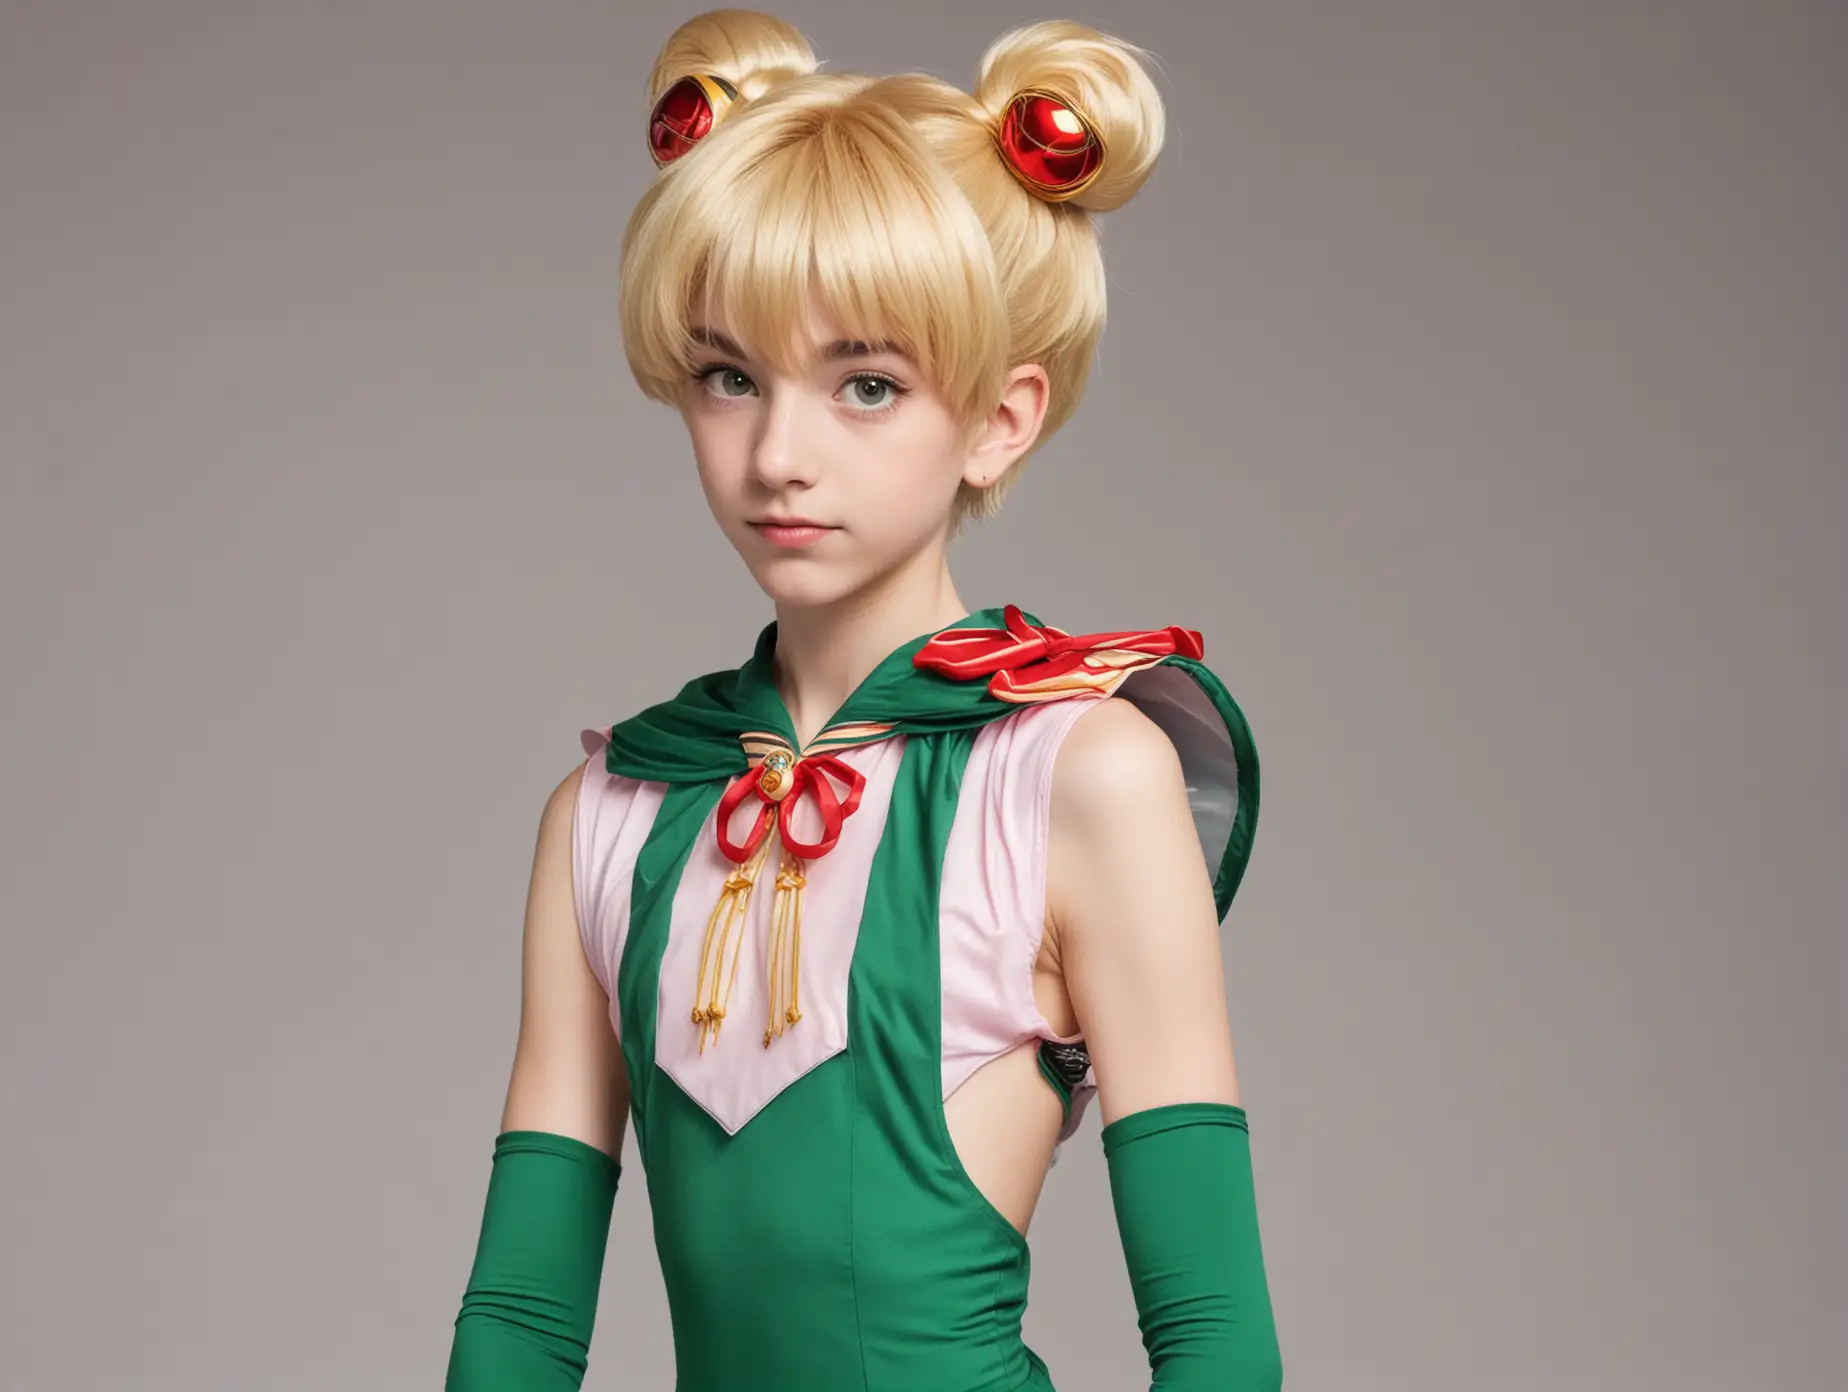 Slim-Blond-Boy-Cosplaying-Sailor-Moon-in-Green-Costume